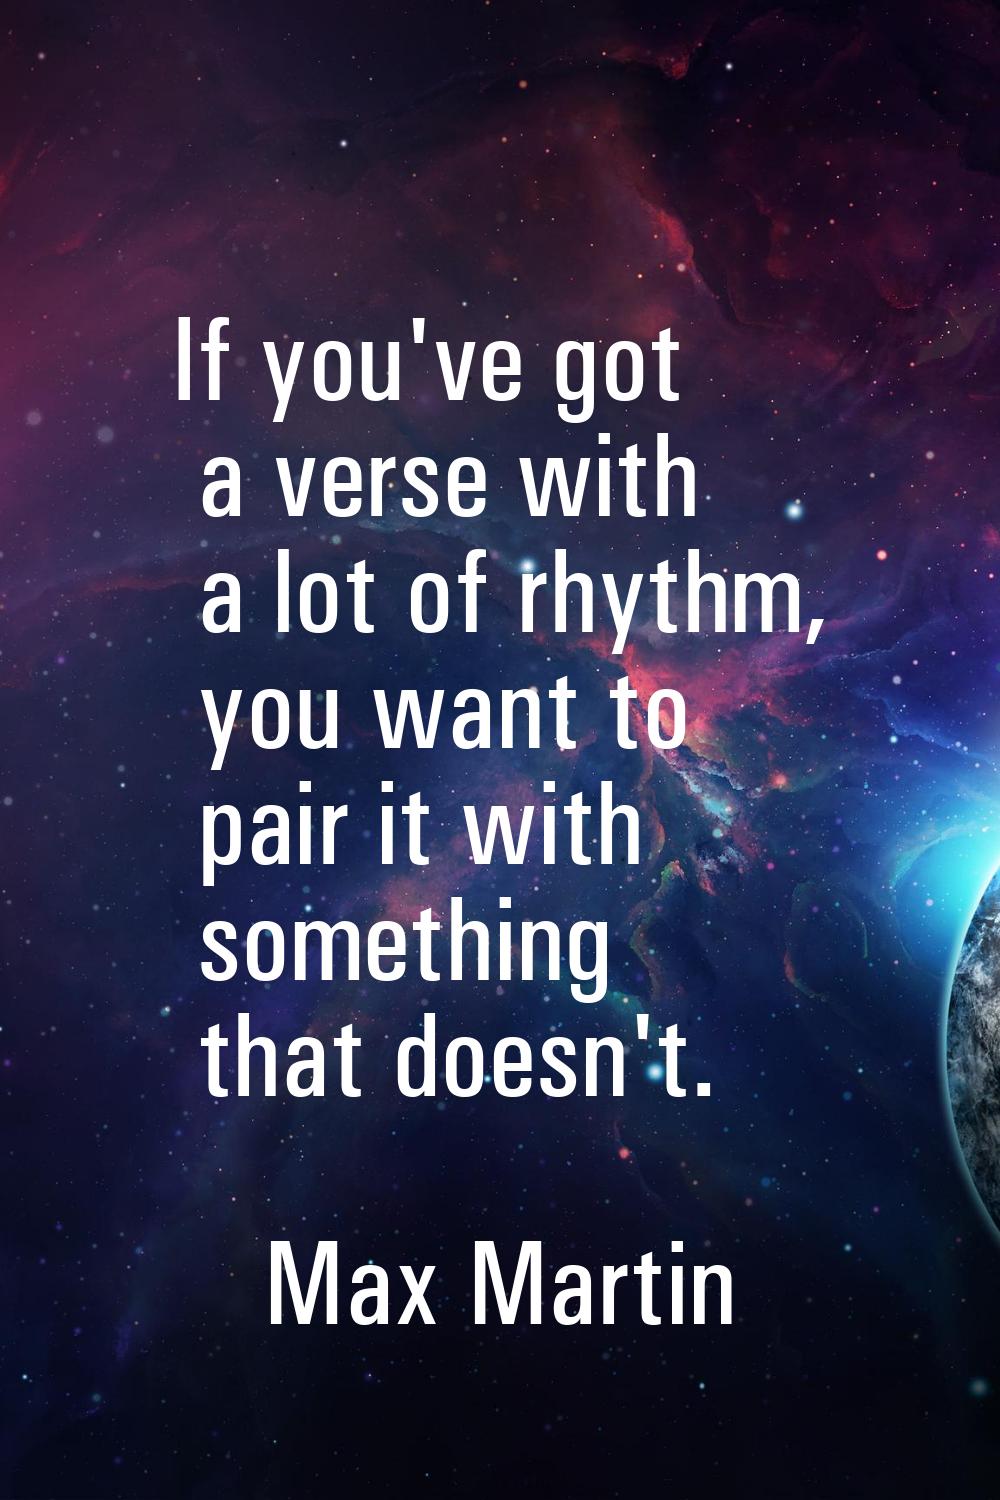 If you've got a verse with a lot of rhythm, you want to pair it with something that doesn't.